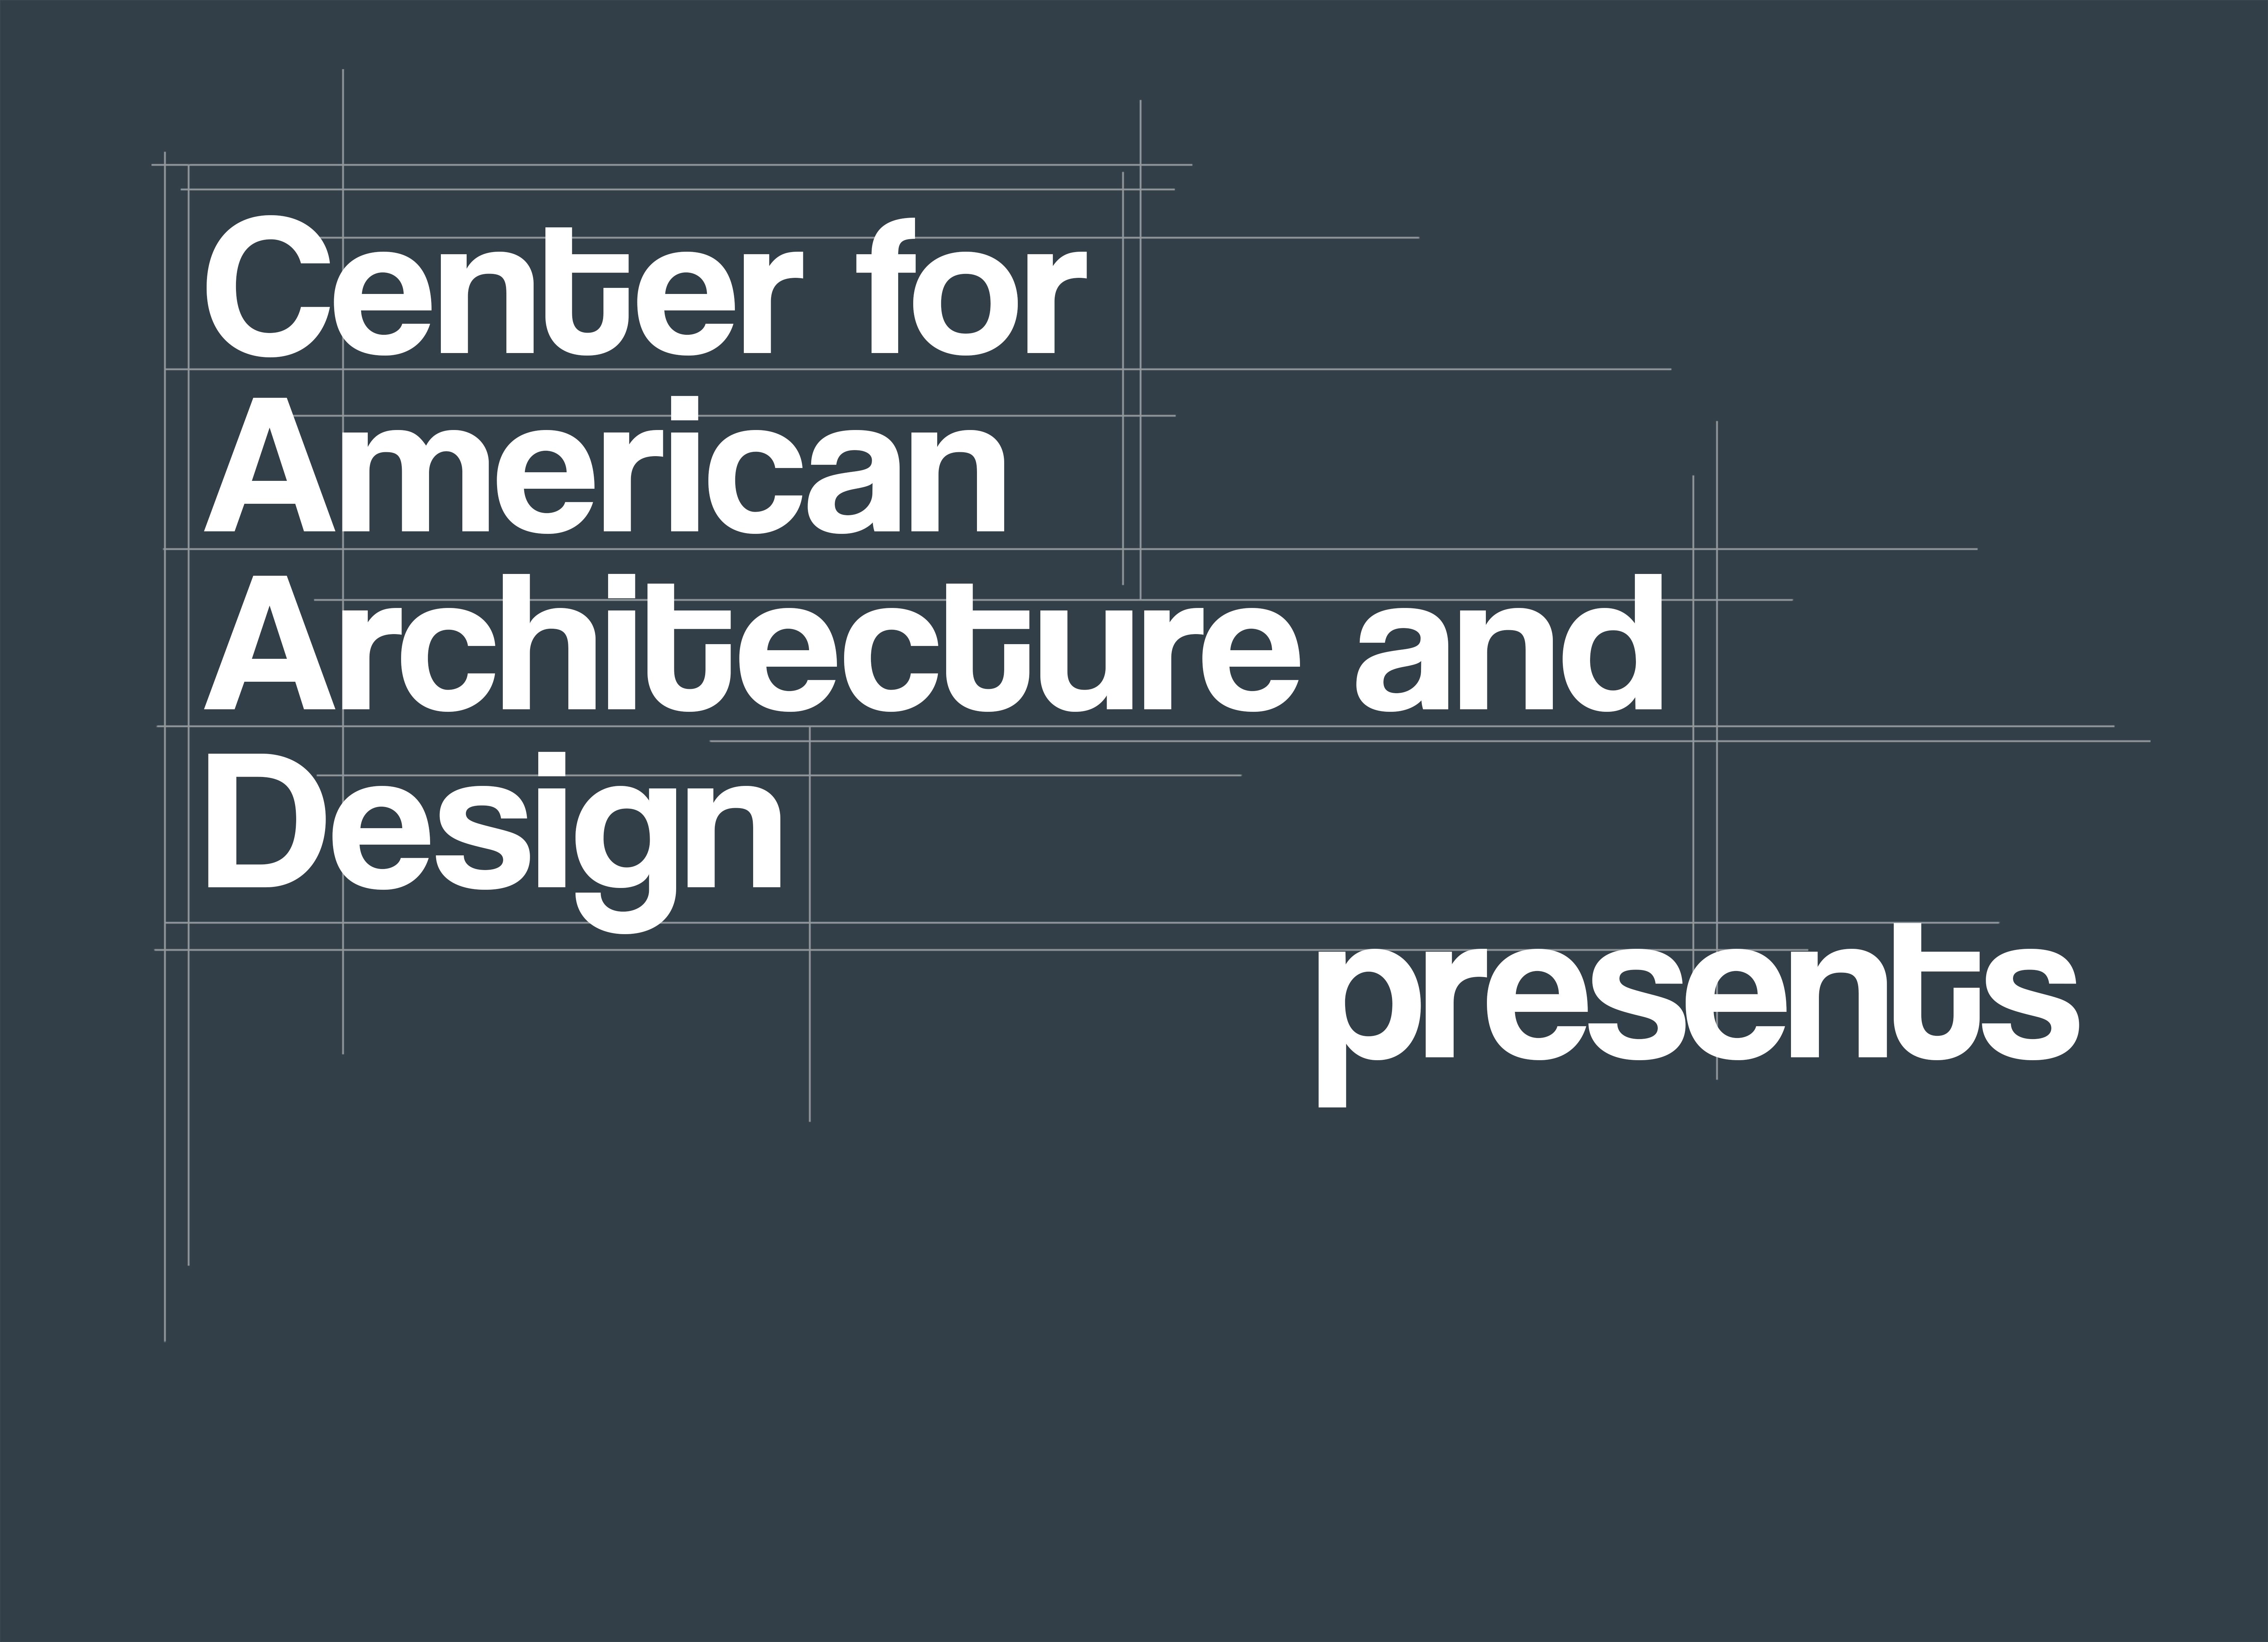 Poster that reads "Center for American Architecture and Design presents"